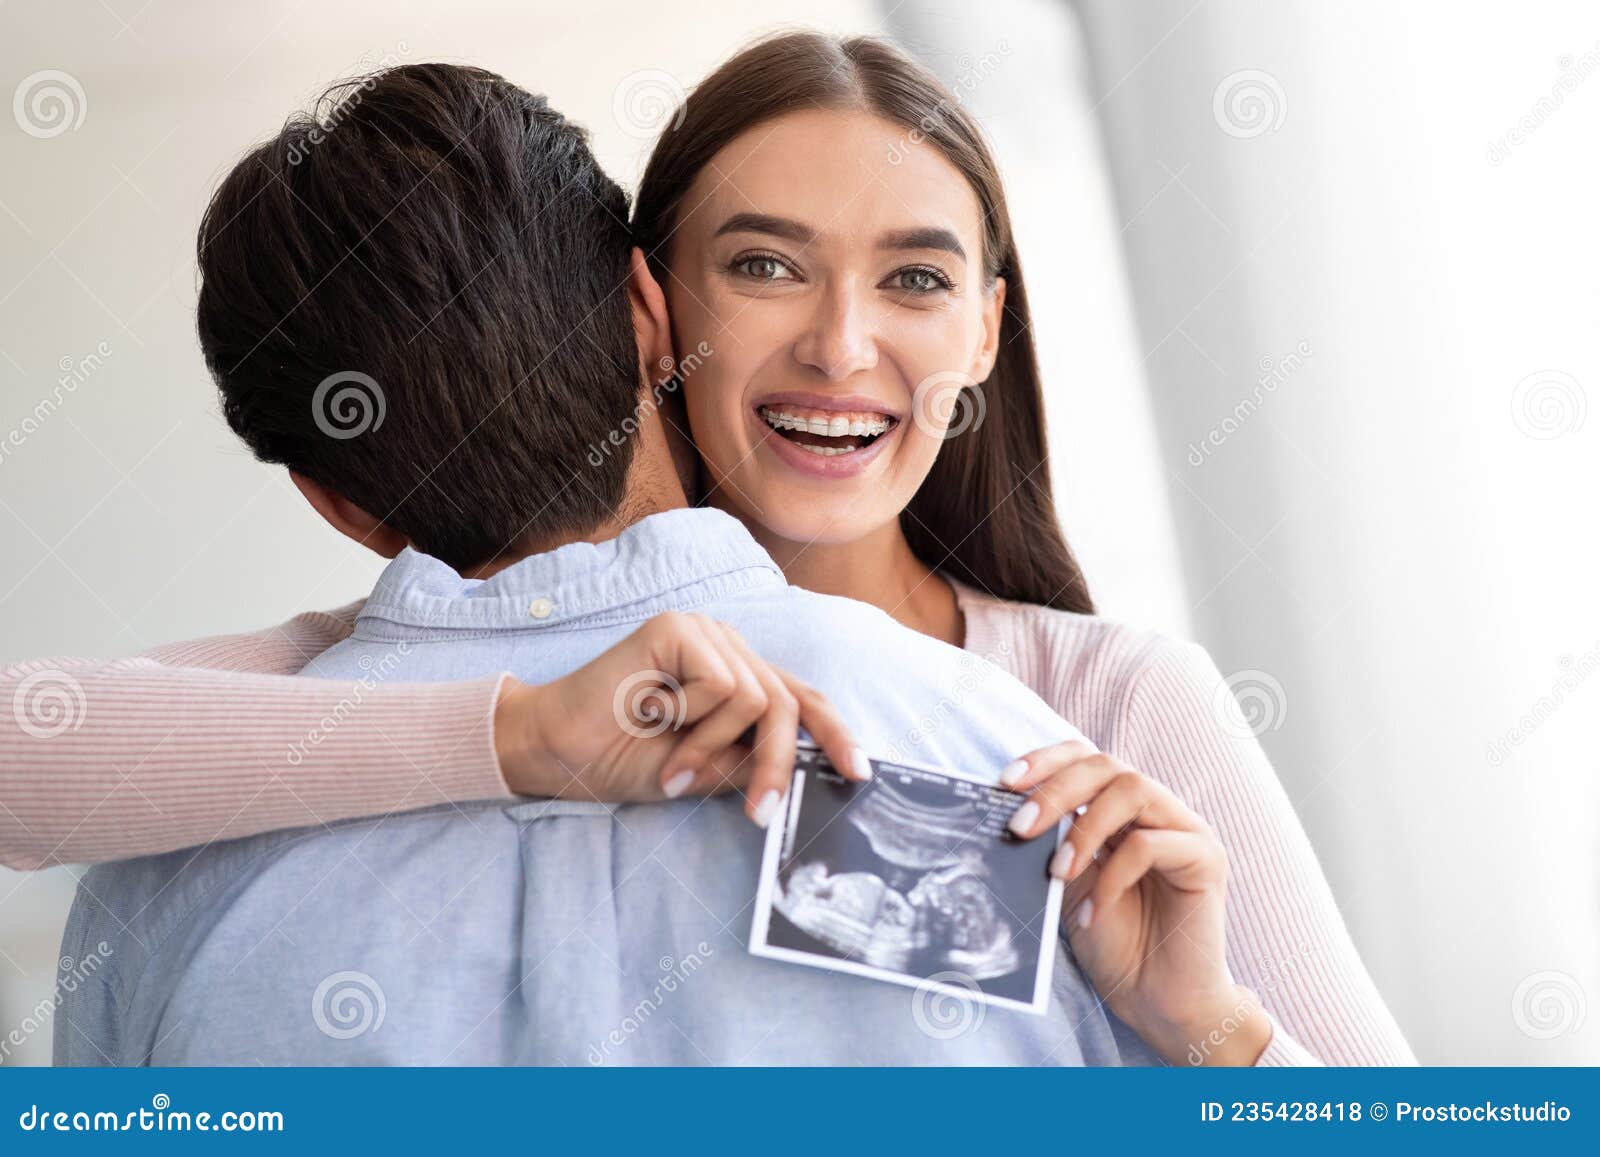 Happy European Young Wife Hugs Husband and Holds Ultrasound Picture of Baby in Living Room Interior Stock Photo picture